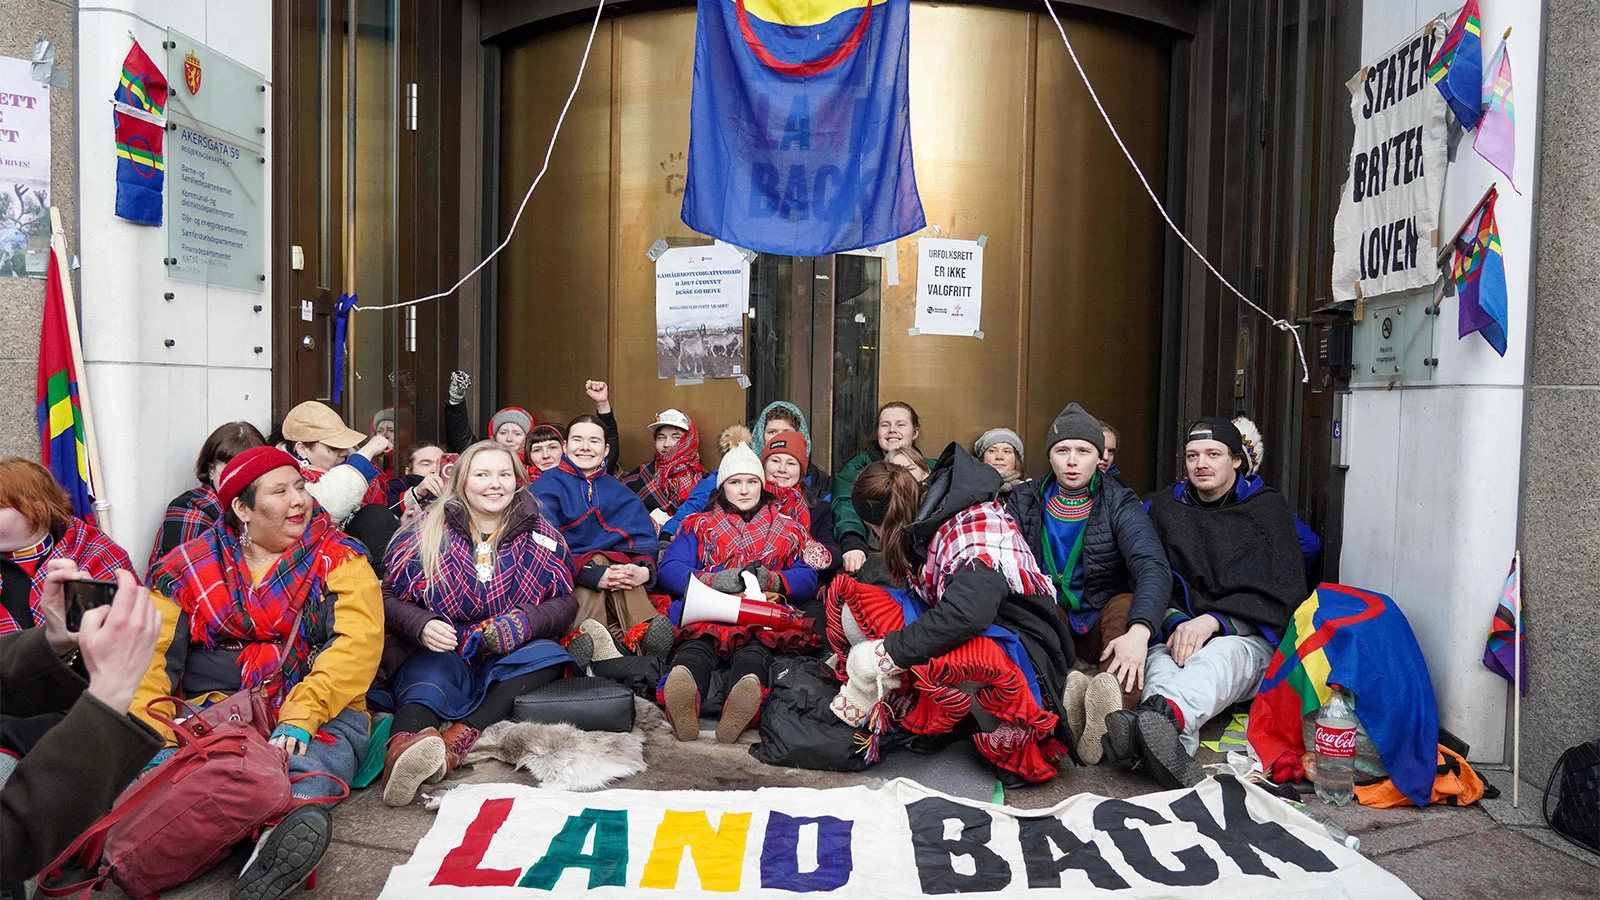 Indigenous youth occupy Norwegian energy office to protest illegal wind farm